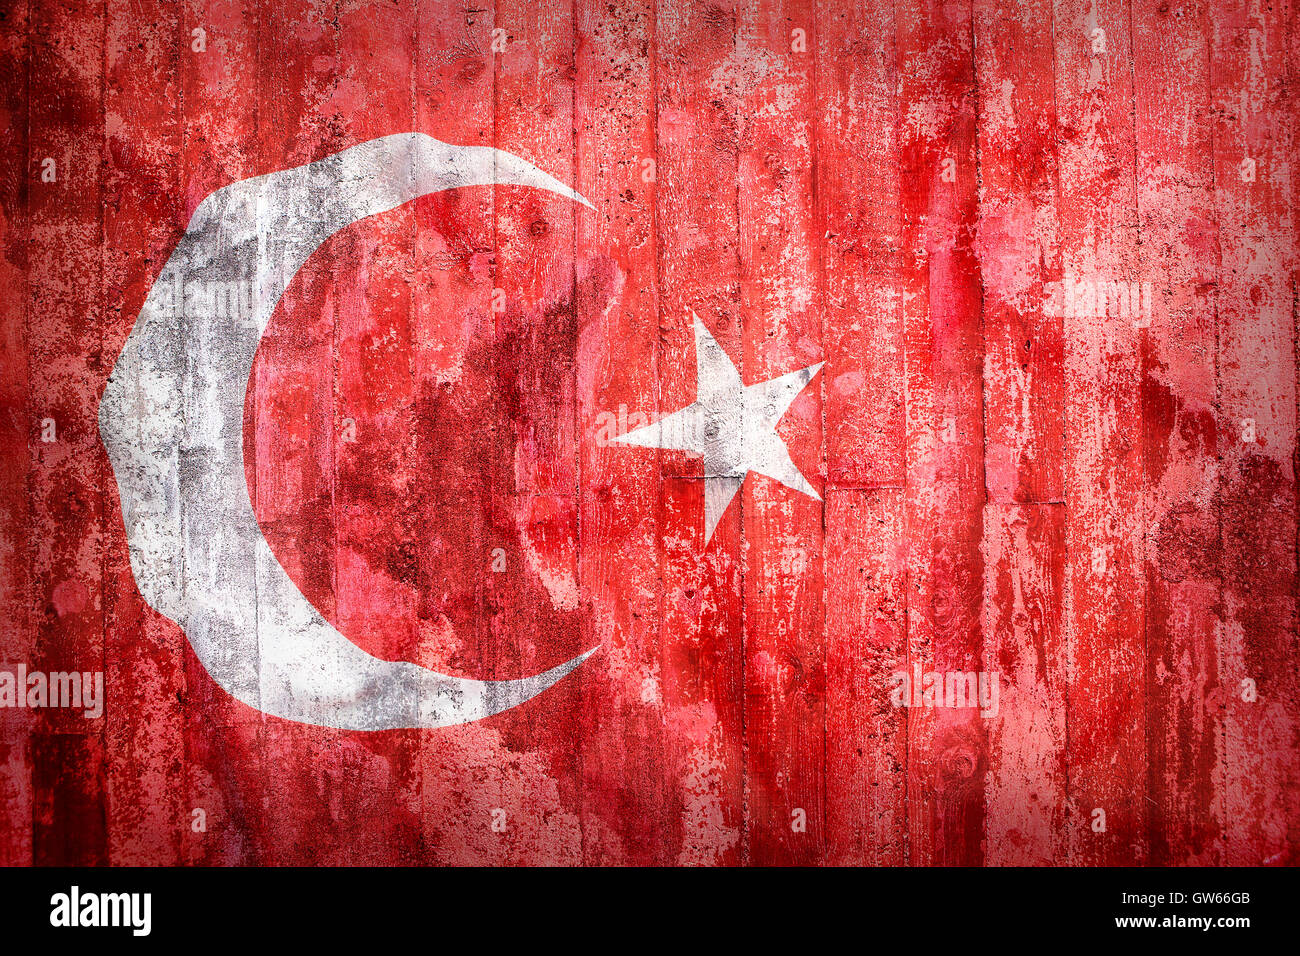 Grunge style of Turkey flag on a brick wall for background Stock Photo